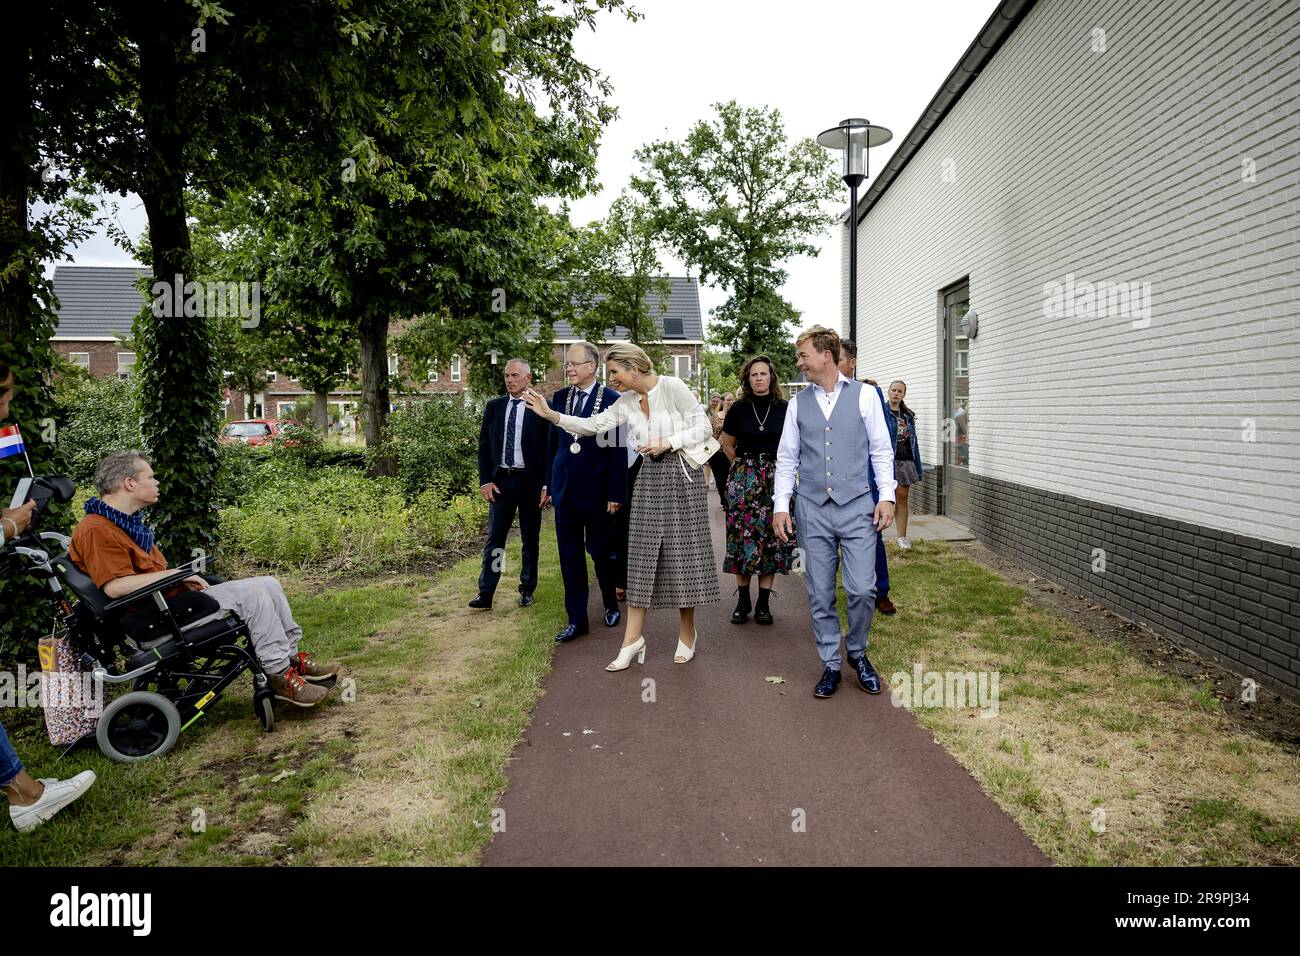 STERKSEL - Queen Maxima during a working visit to the inclusive residential area Kloostervelden. The district is connected to Stichting Kempenhaeghe in Heeze-Leende, a center of expertise for people with complex epilepsy, sleep disorders and neurological learning and developmental disorders. ANP ROBIN VAN LONKHUIJSEN netherlands out - belgium out Stock Photo